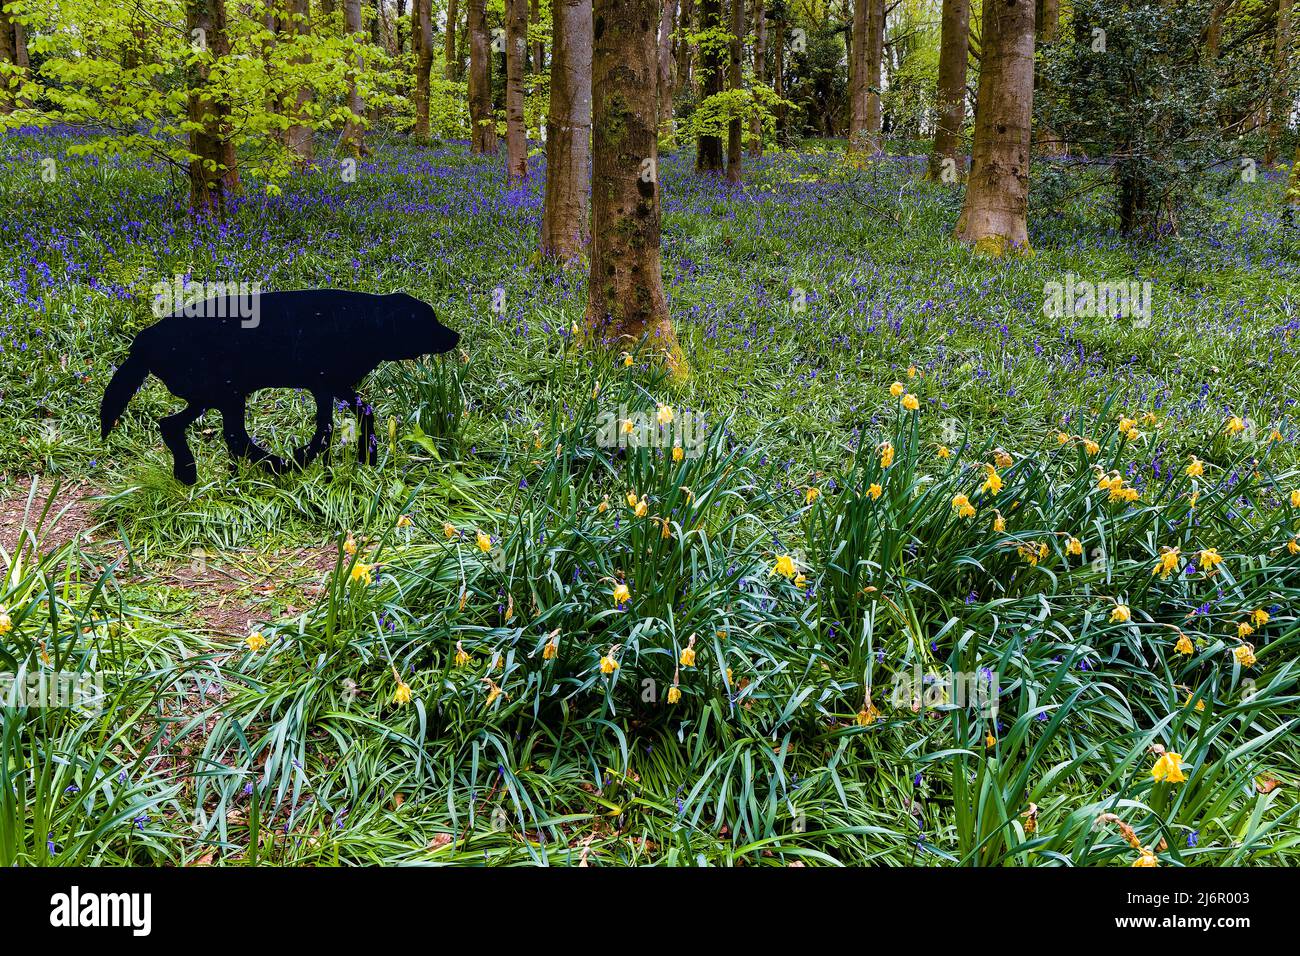 Colourful carpet of flowers in a woodland area in Wales, UK Stock Photo